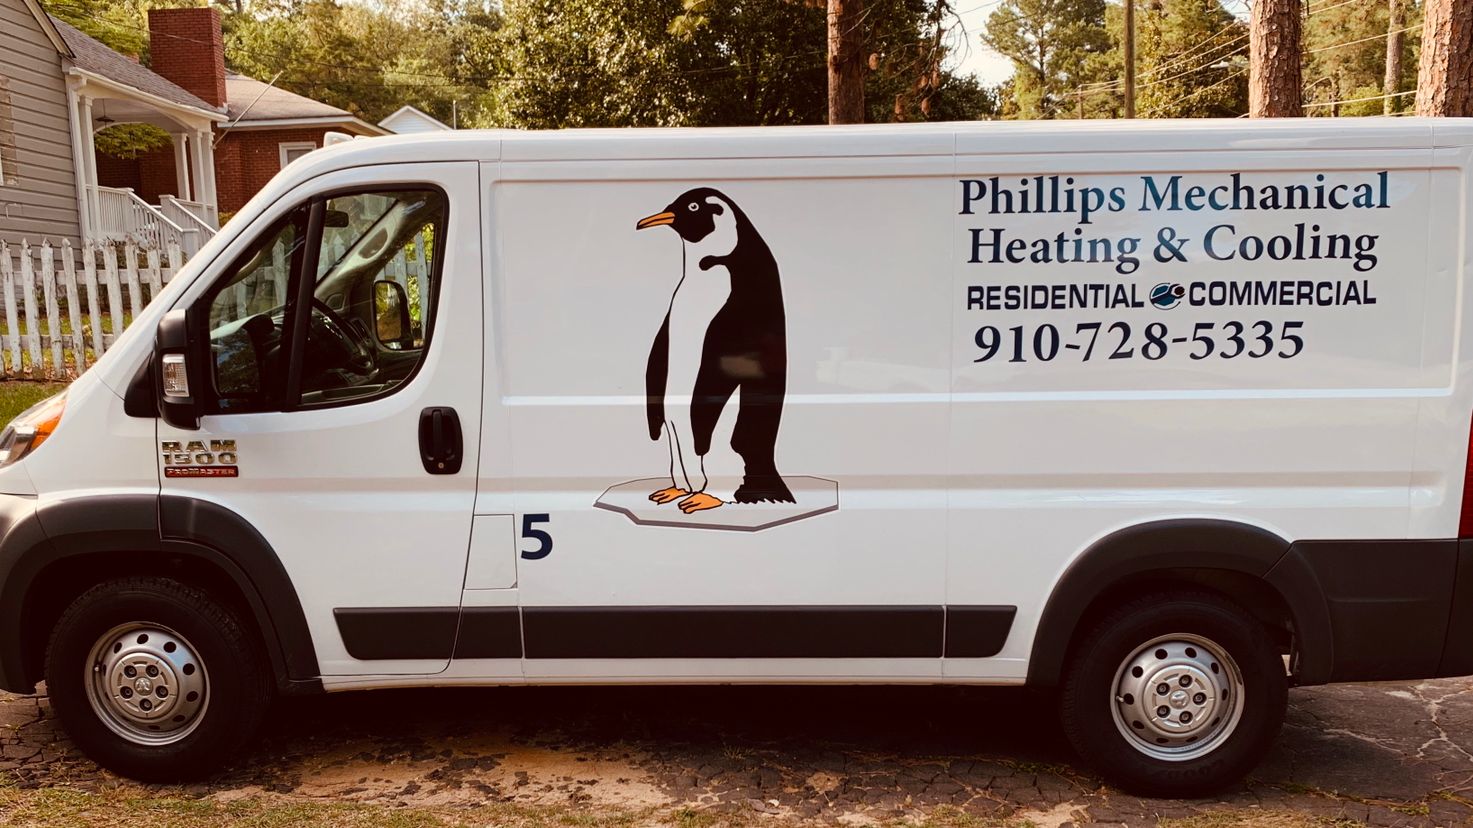 Phillips Mechanical Heating & Cooling